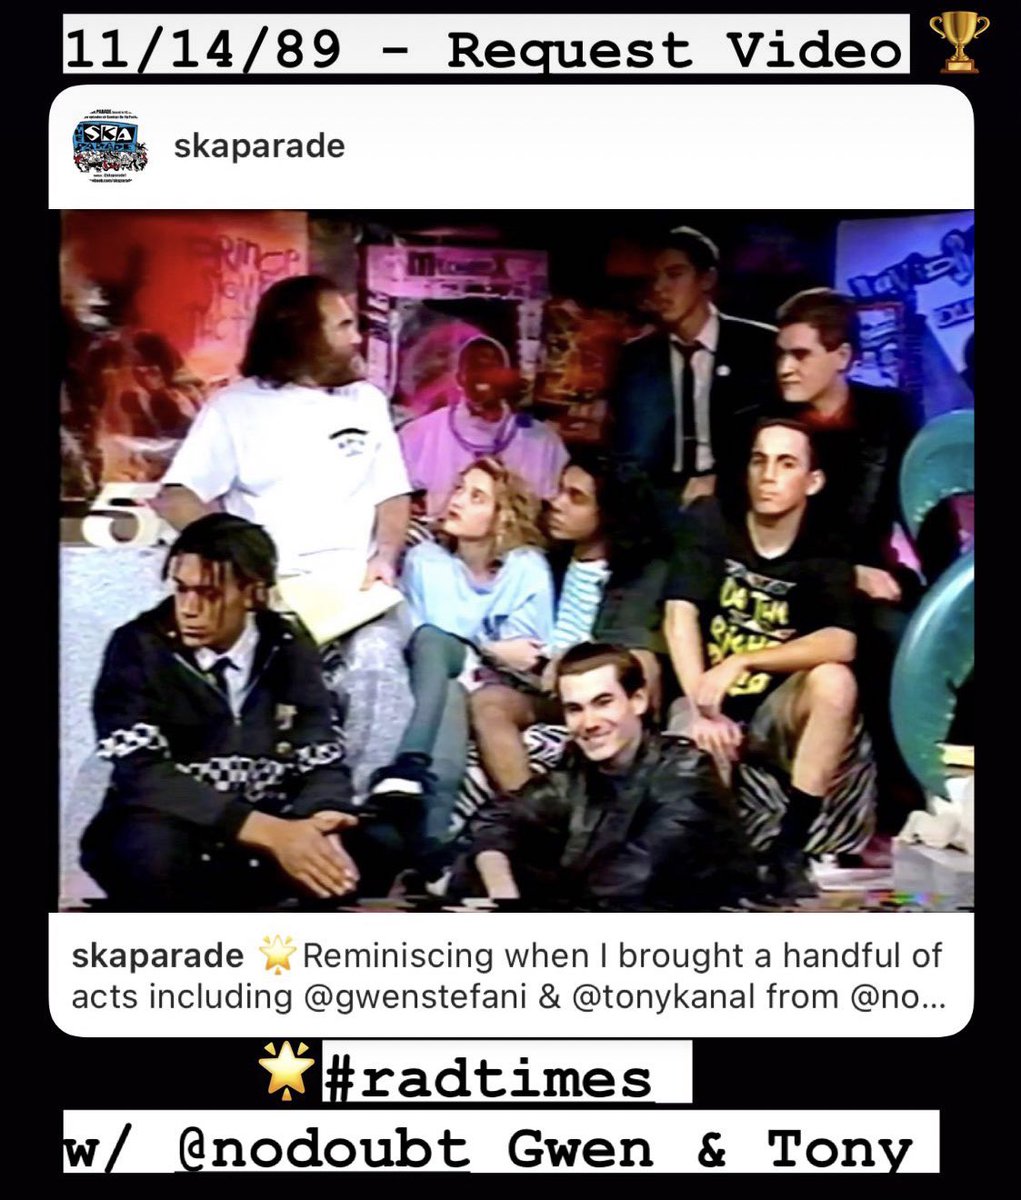 🌟Reminiscing when I brought a handful of acts including @gwenstefani & @tonykanal of @nodoubt onto “Request Video” w/ KROQ’s Poorman on KDOC Ch. 56 TV to promote the start of #SkaParade on KUCI - 11/14/89! #radtimes #thirdwaveska #nodoubt #theskeletones #ska #coachella2024